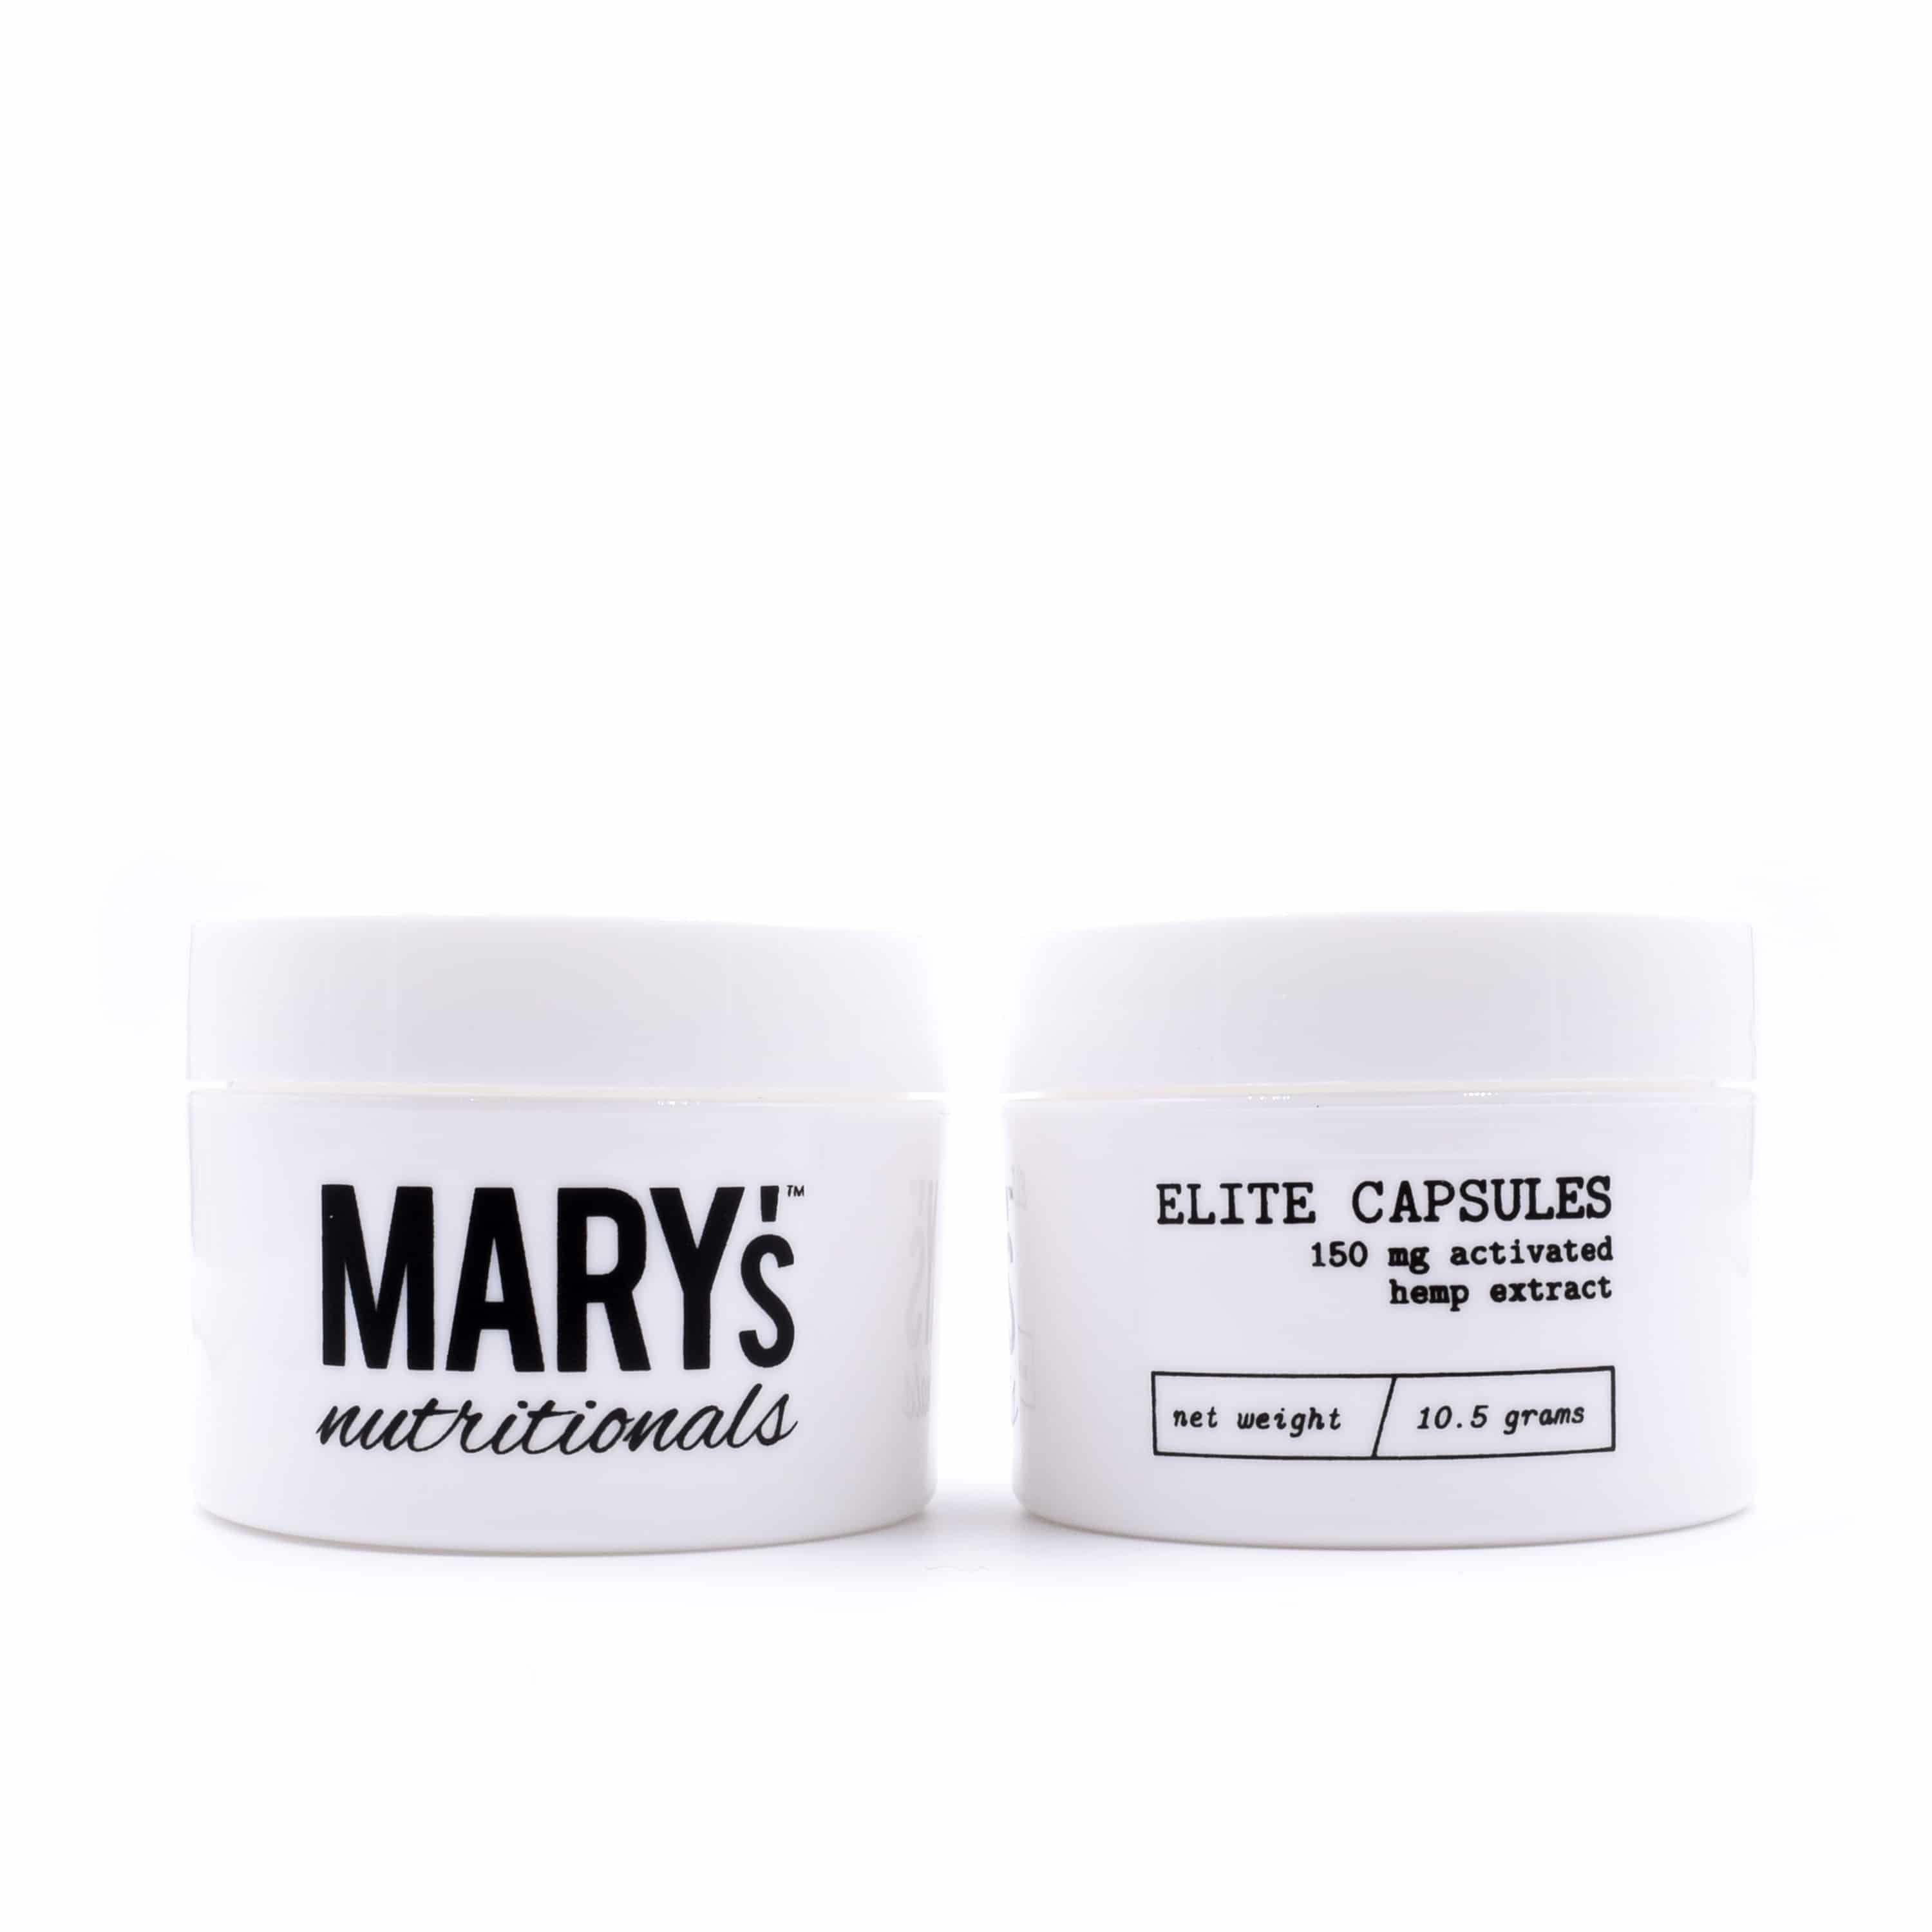 Mary's Nutritionals - Elite Capsules Supplements & Capsules Mary's Nutritionals   